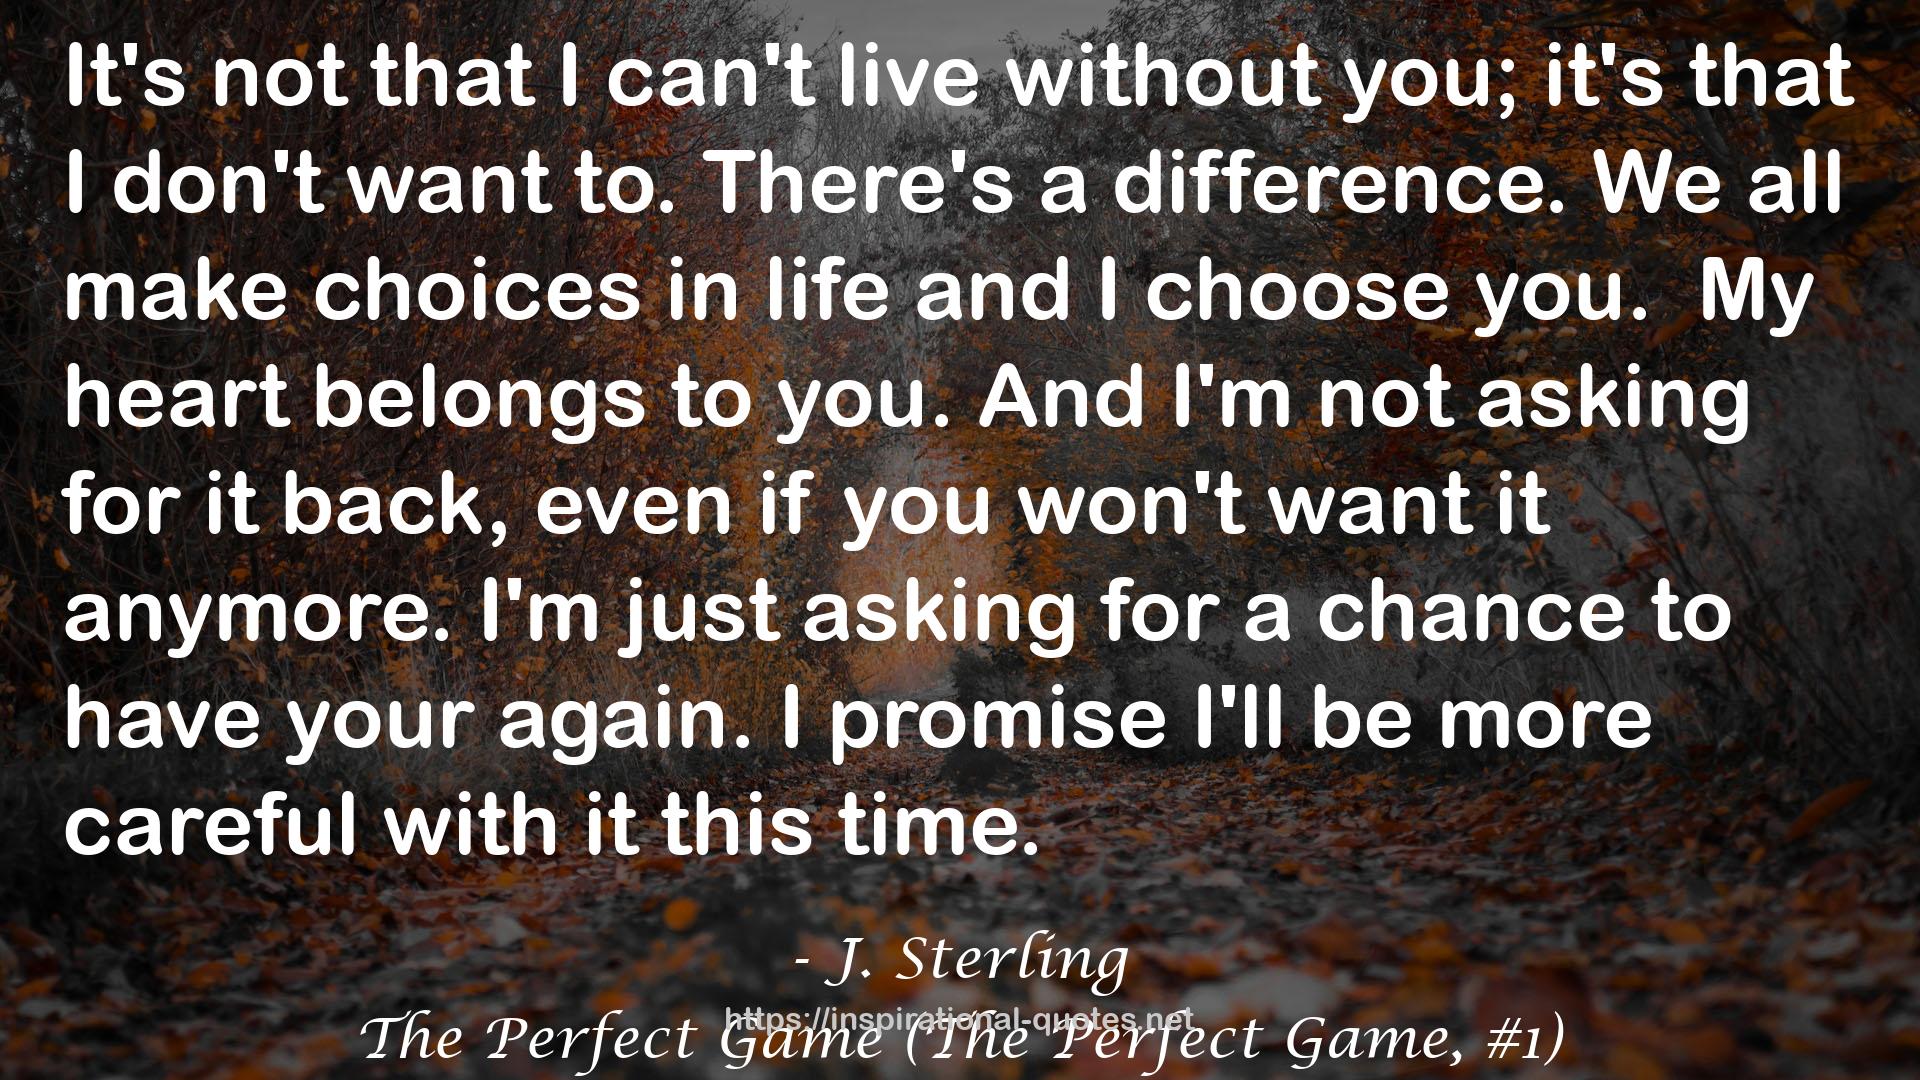 The Perfect Game (The Perfect Game, #1) QUOTES